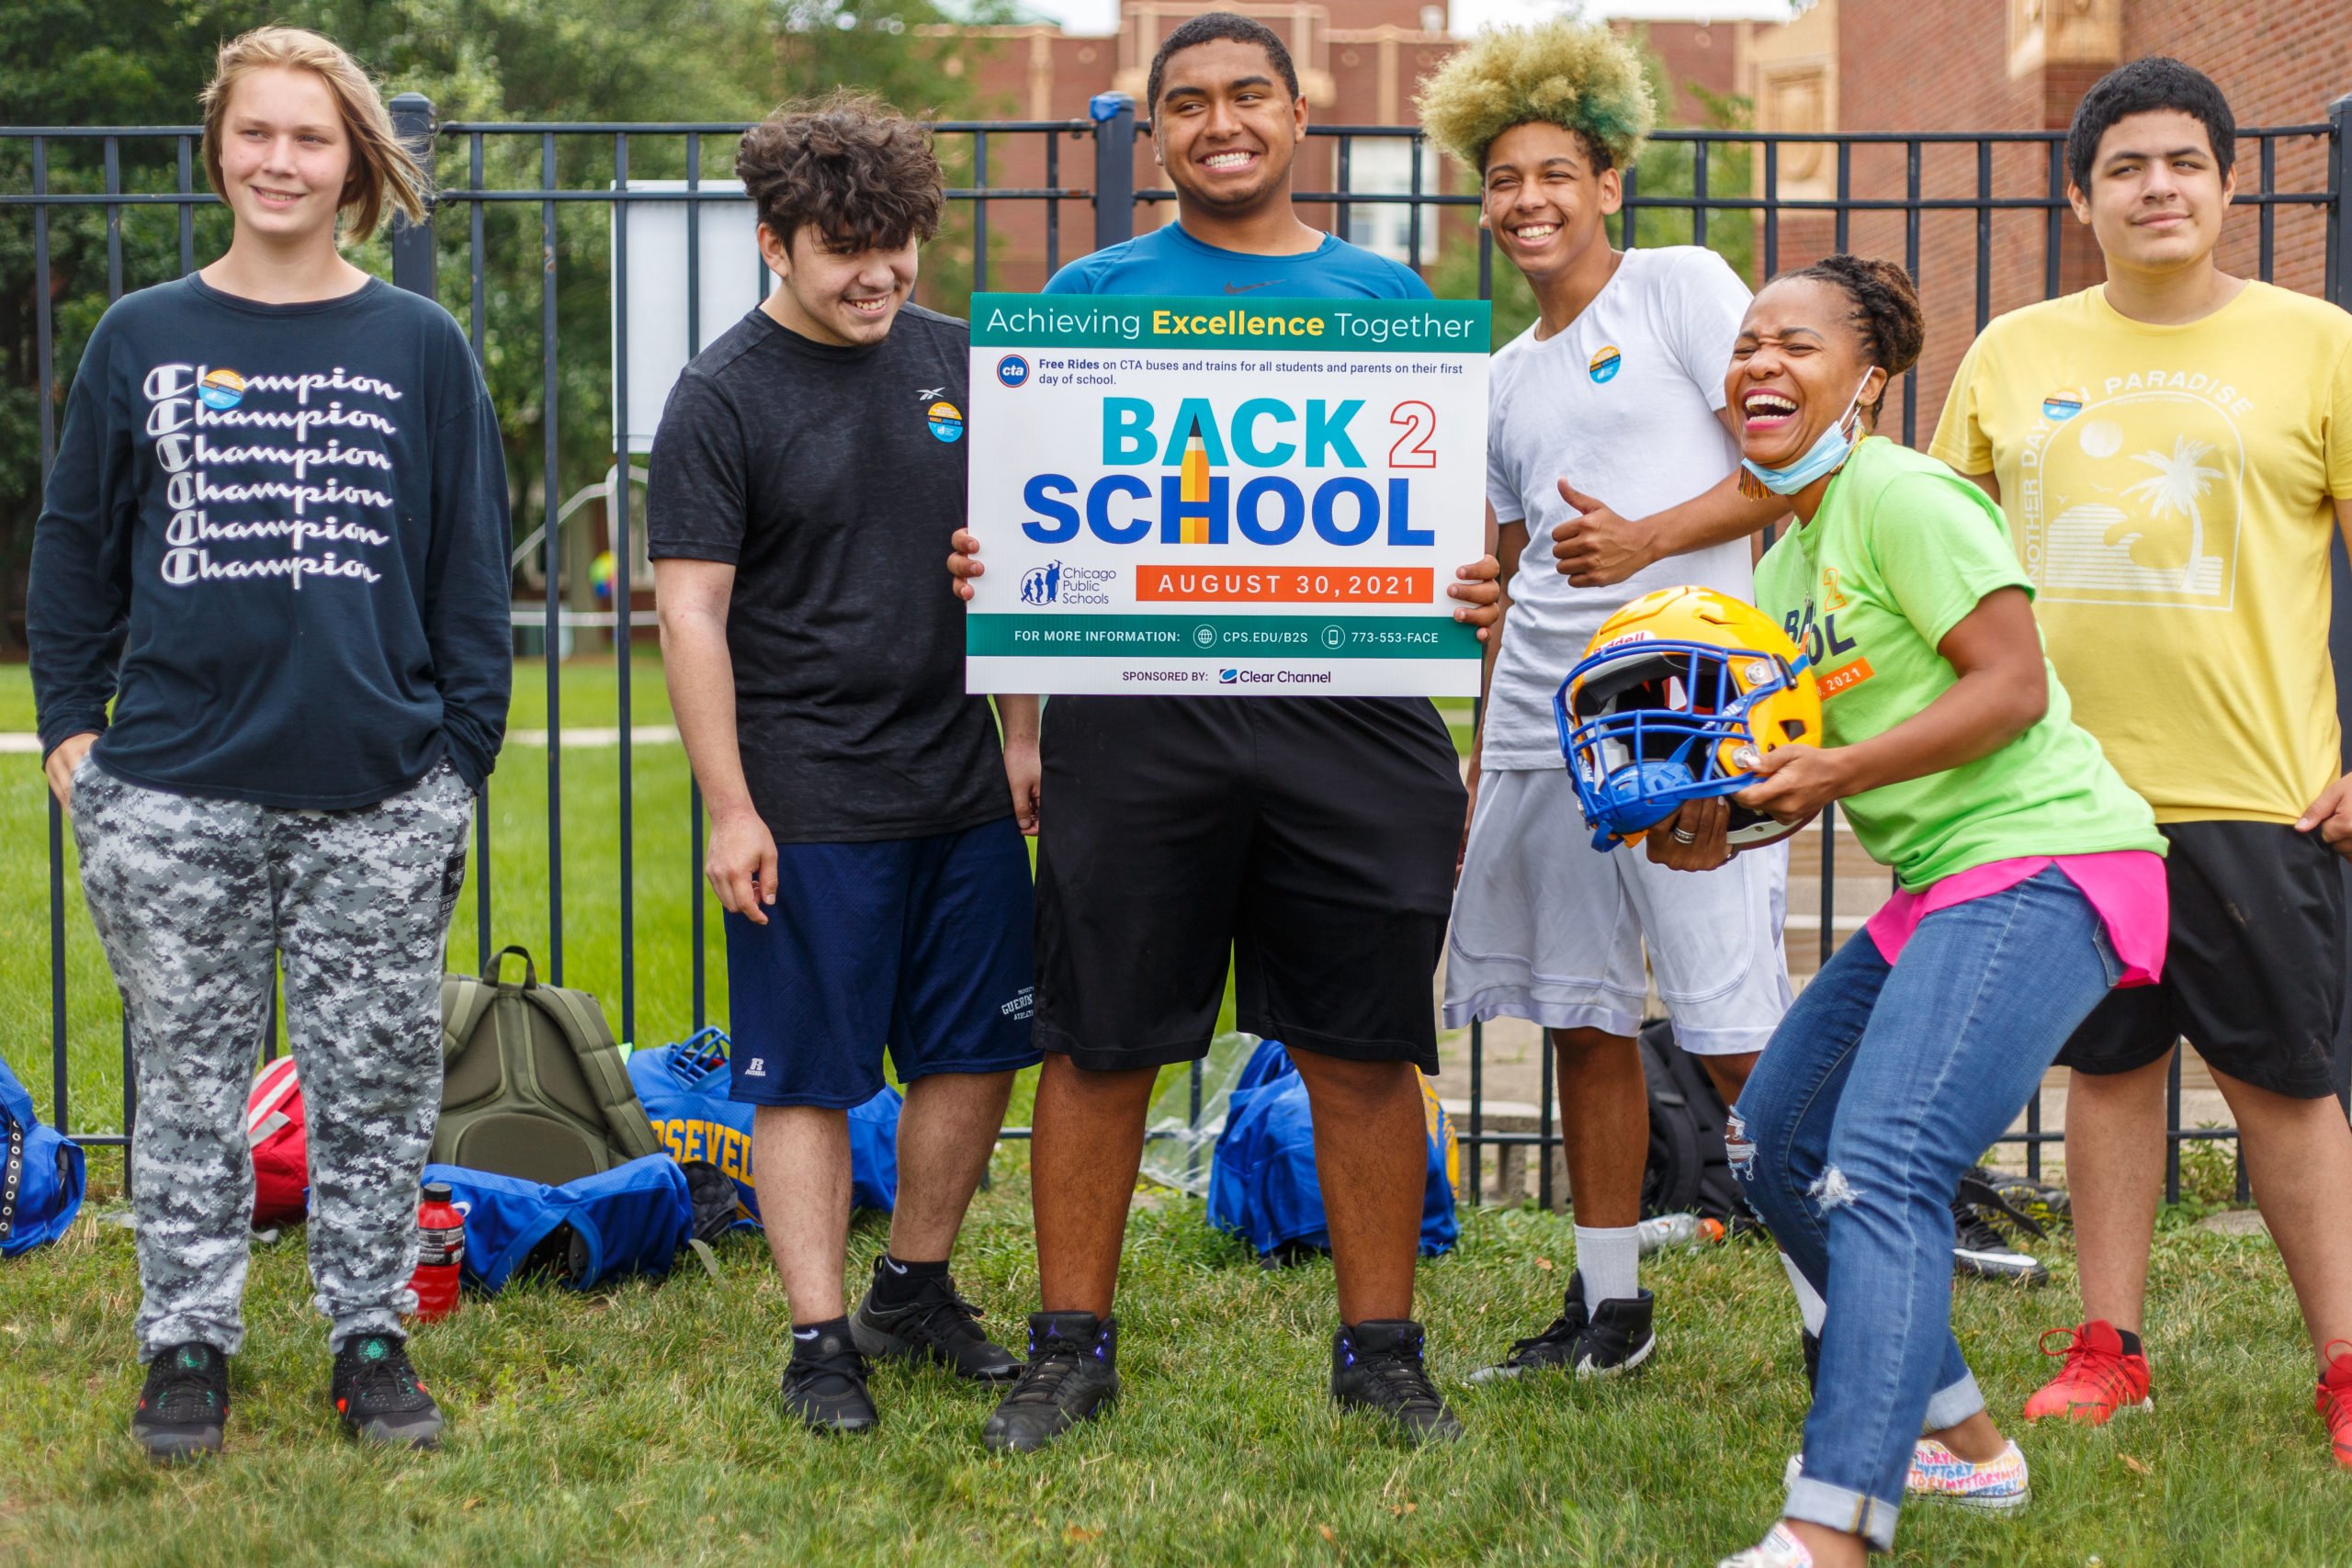 Students holding a Back 2 School sign